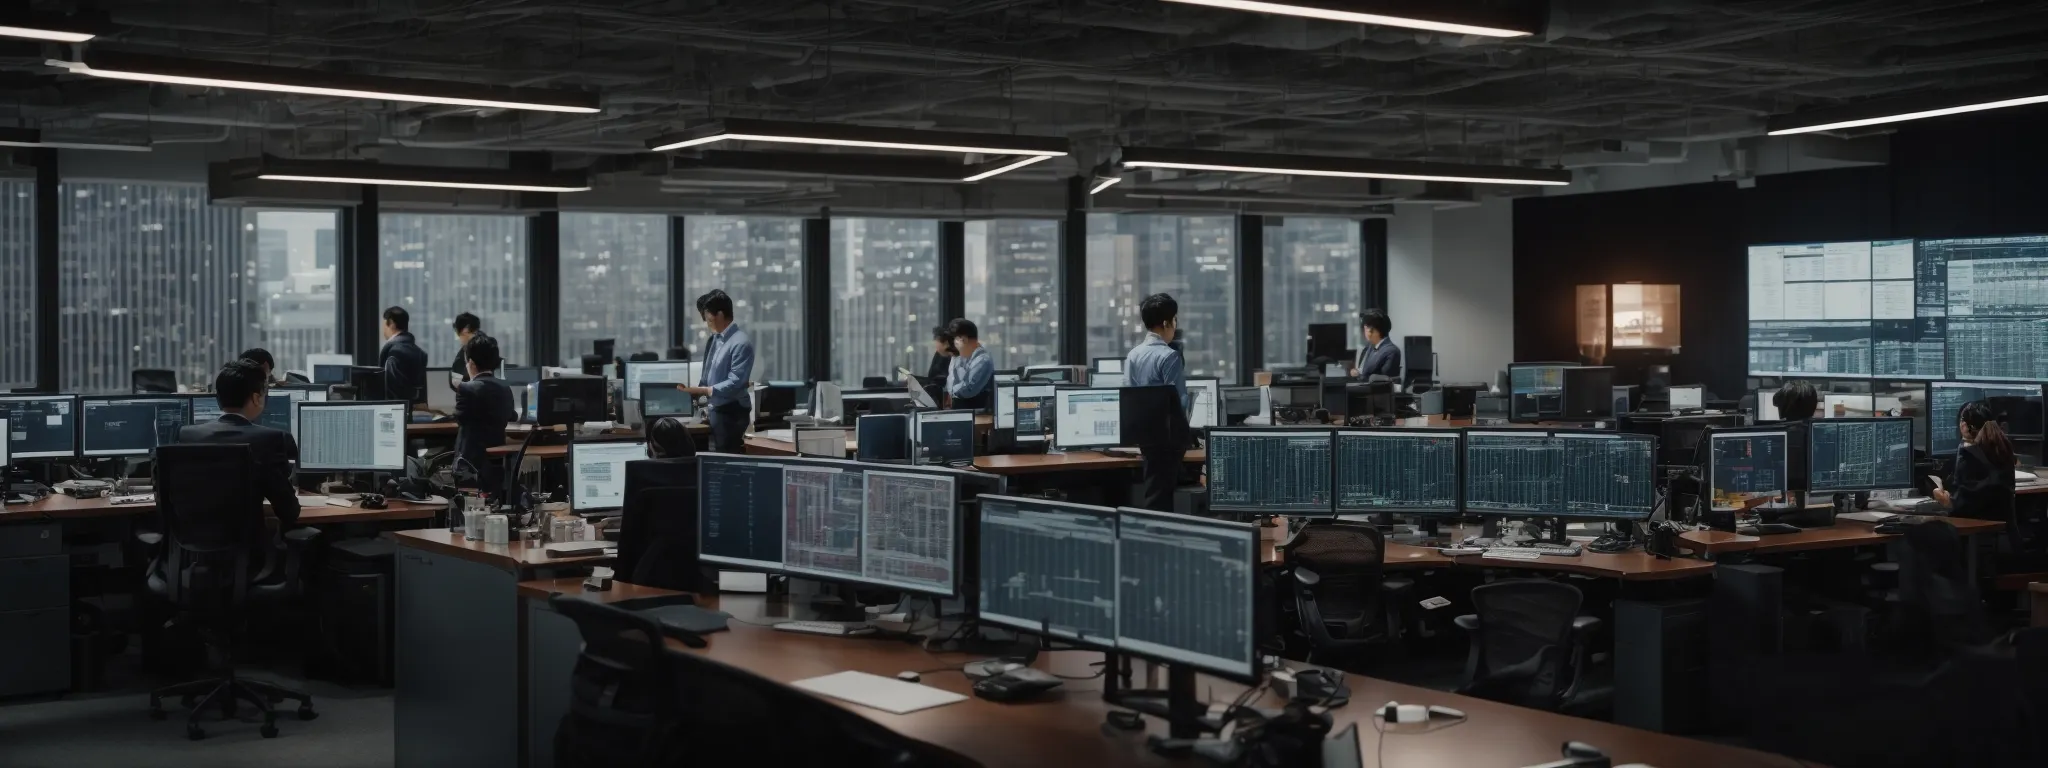 a bustling office with multiple computer screens displaying graphs and analytics.